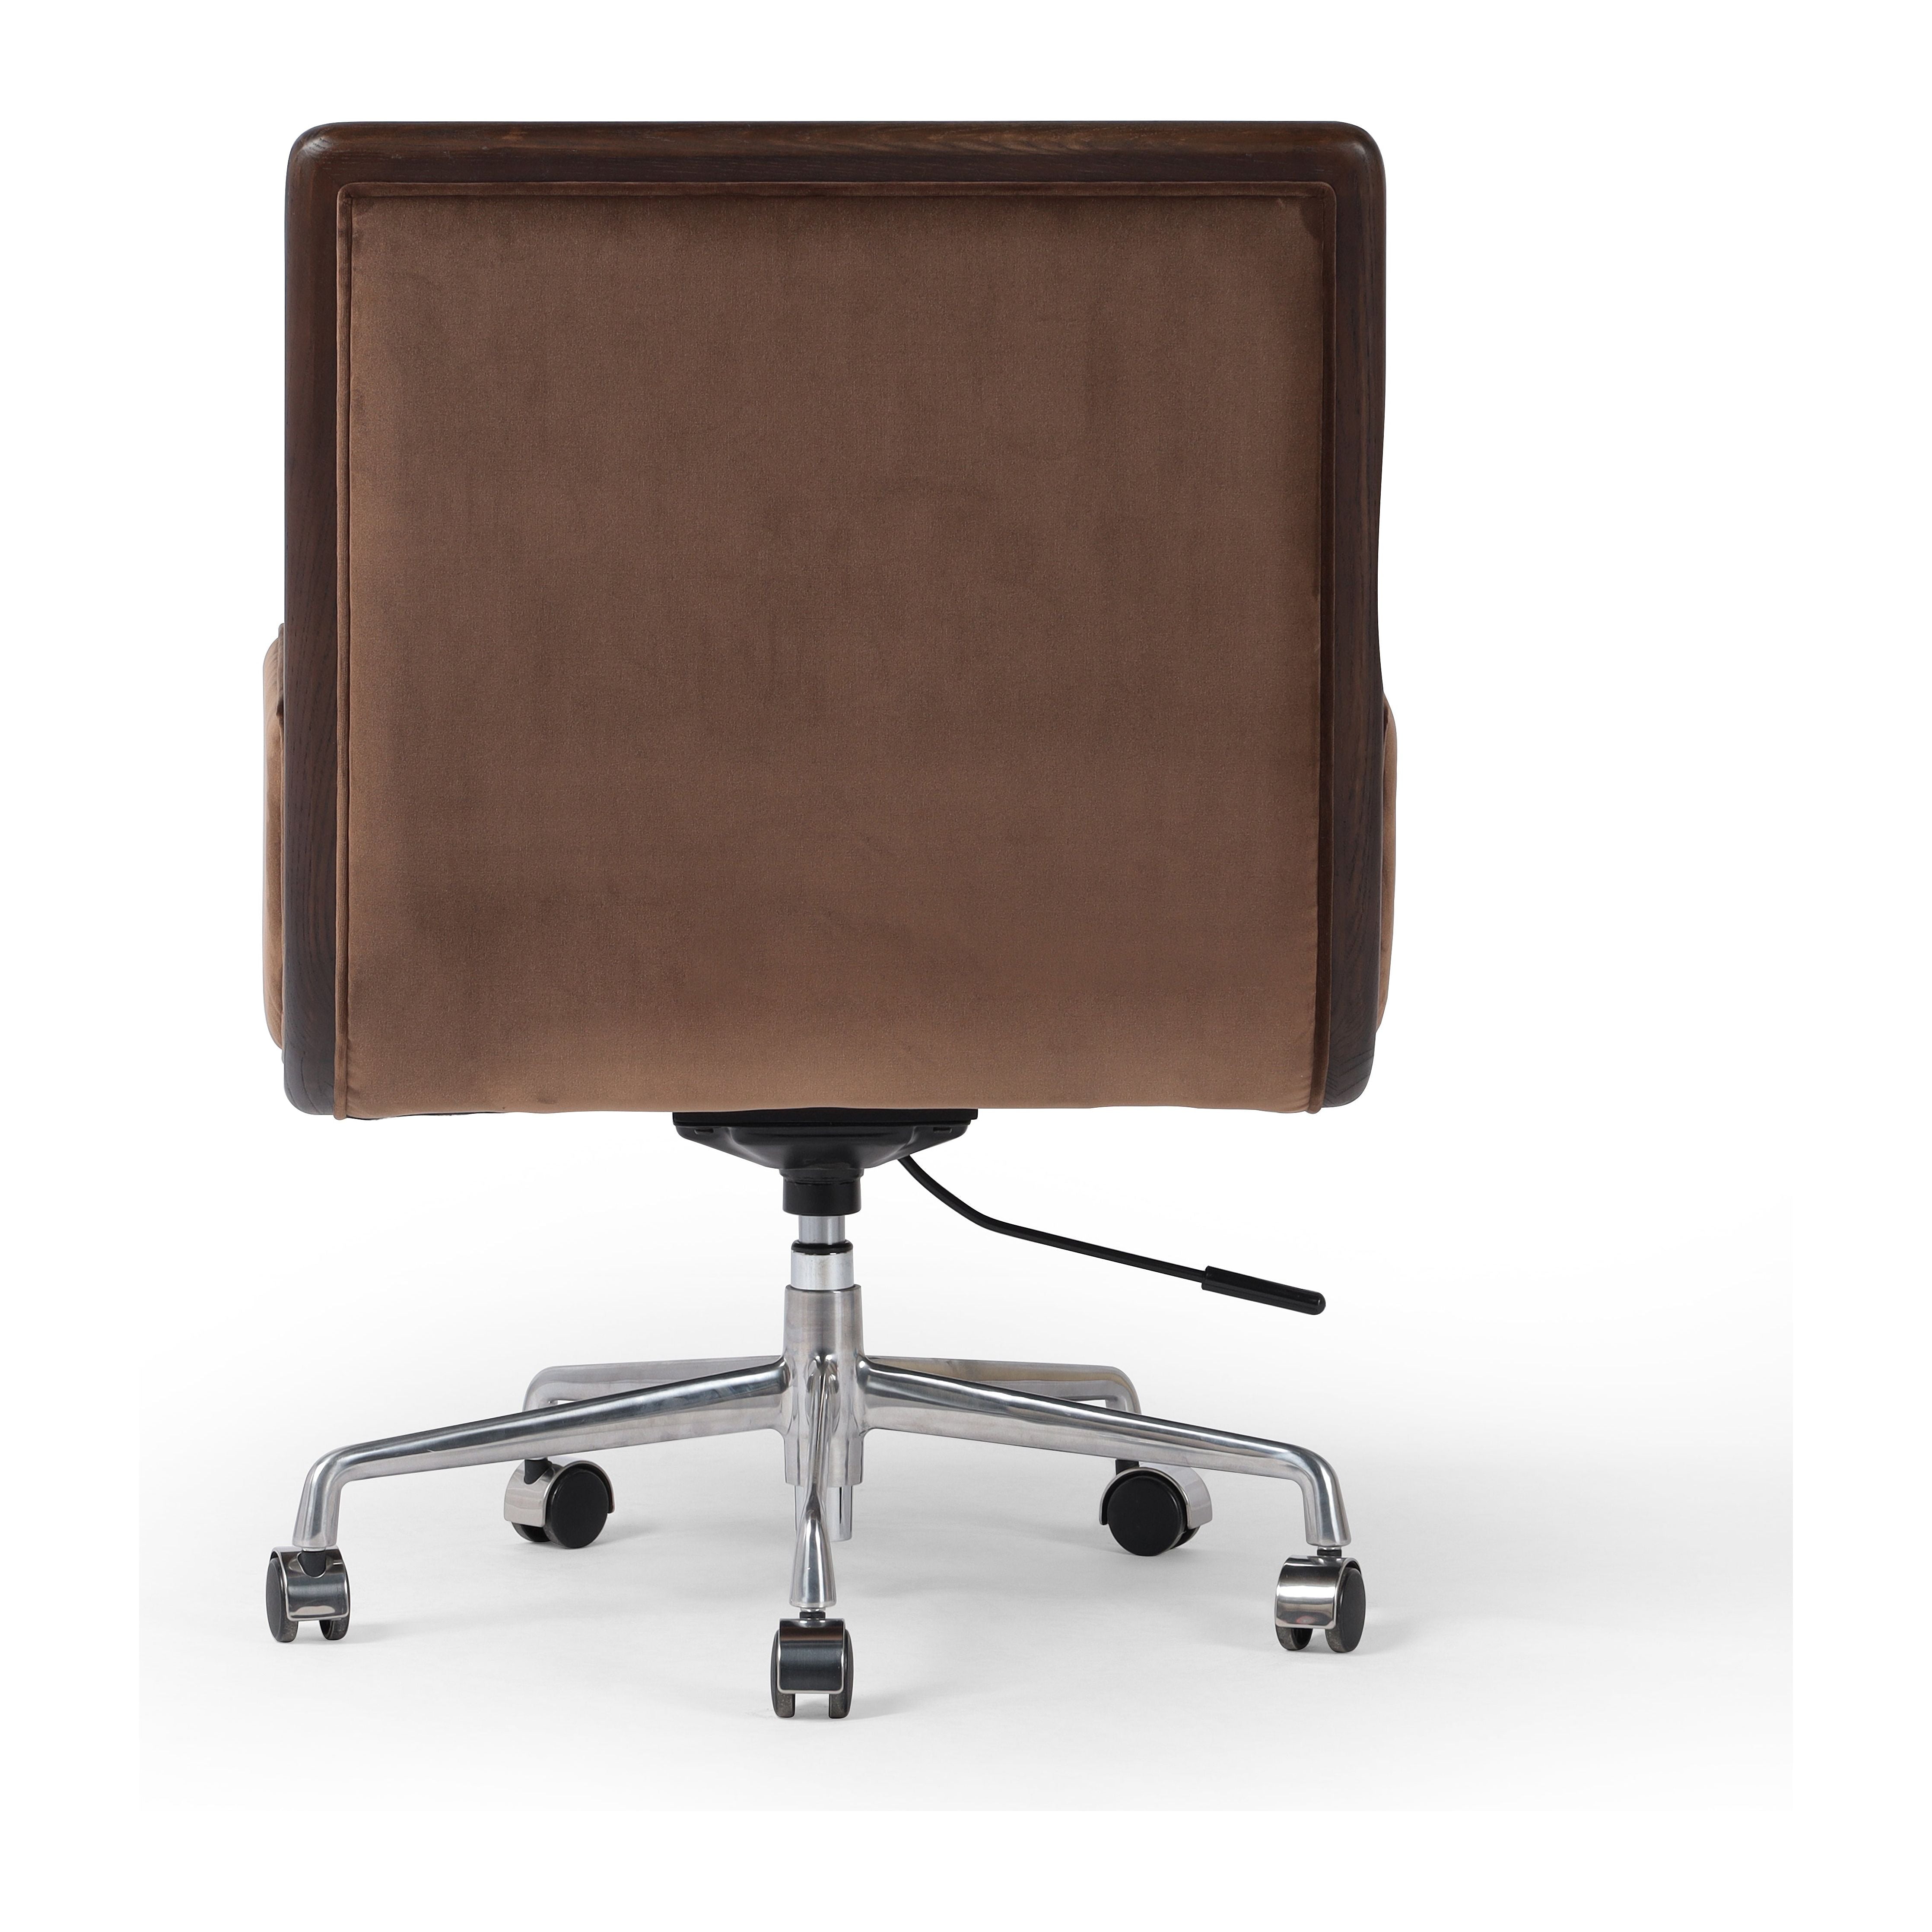 This comfort-driven take on the modern desk chair features velvety cocoa-colored upholstery, pared with a wooden frame. Casters and seat height adjustability for ease as you work. Amethyst Home provides interior design, new construction, custom furniture, and area rugs in the Seattle metro area.